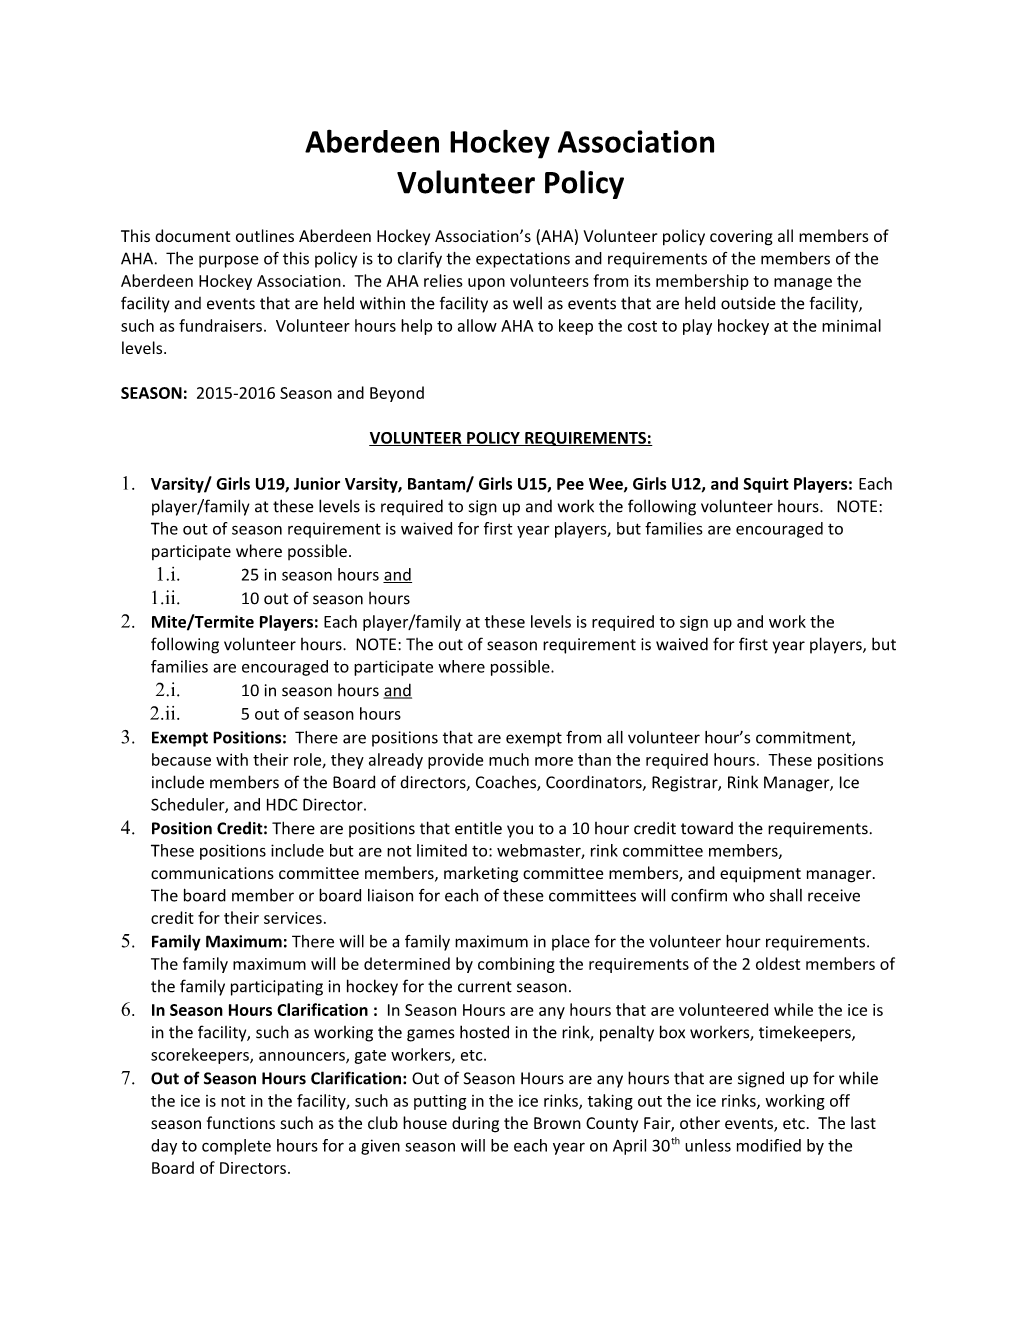 AHA VOLUNTEER HOURS and FUNDRAISING POLICY 2009-2010